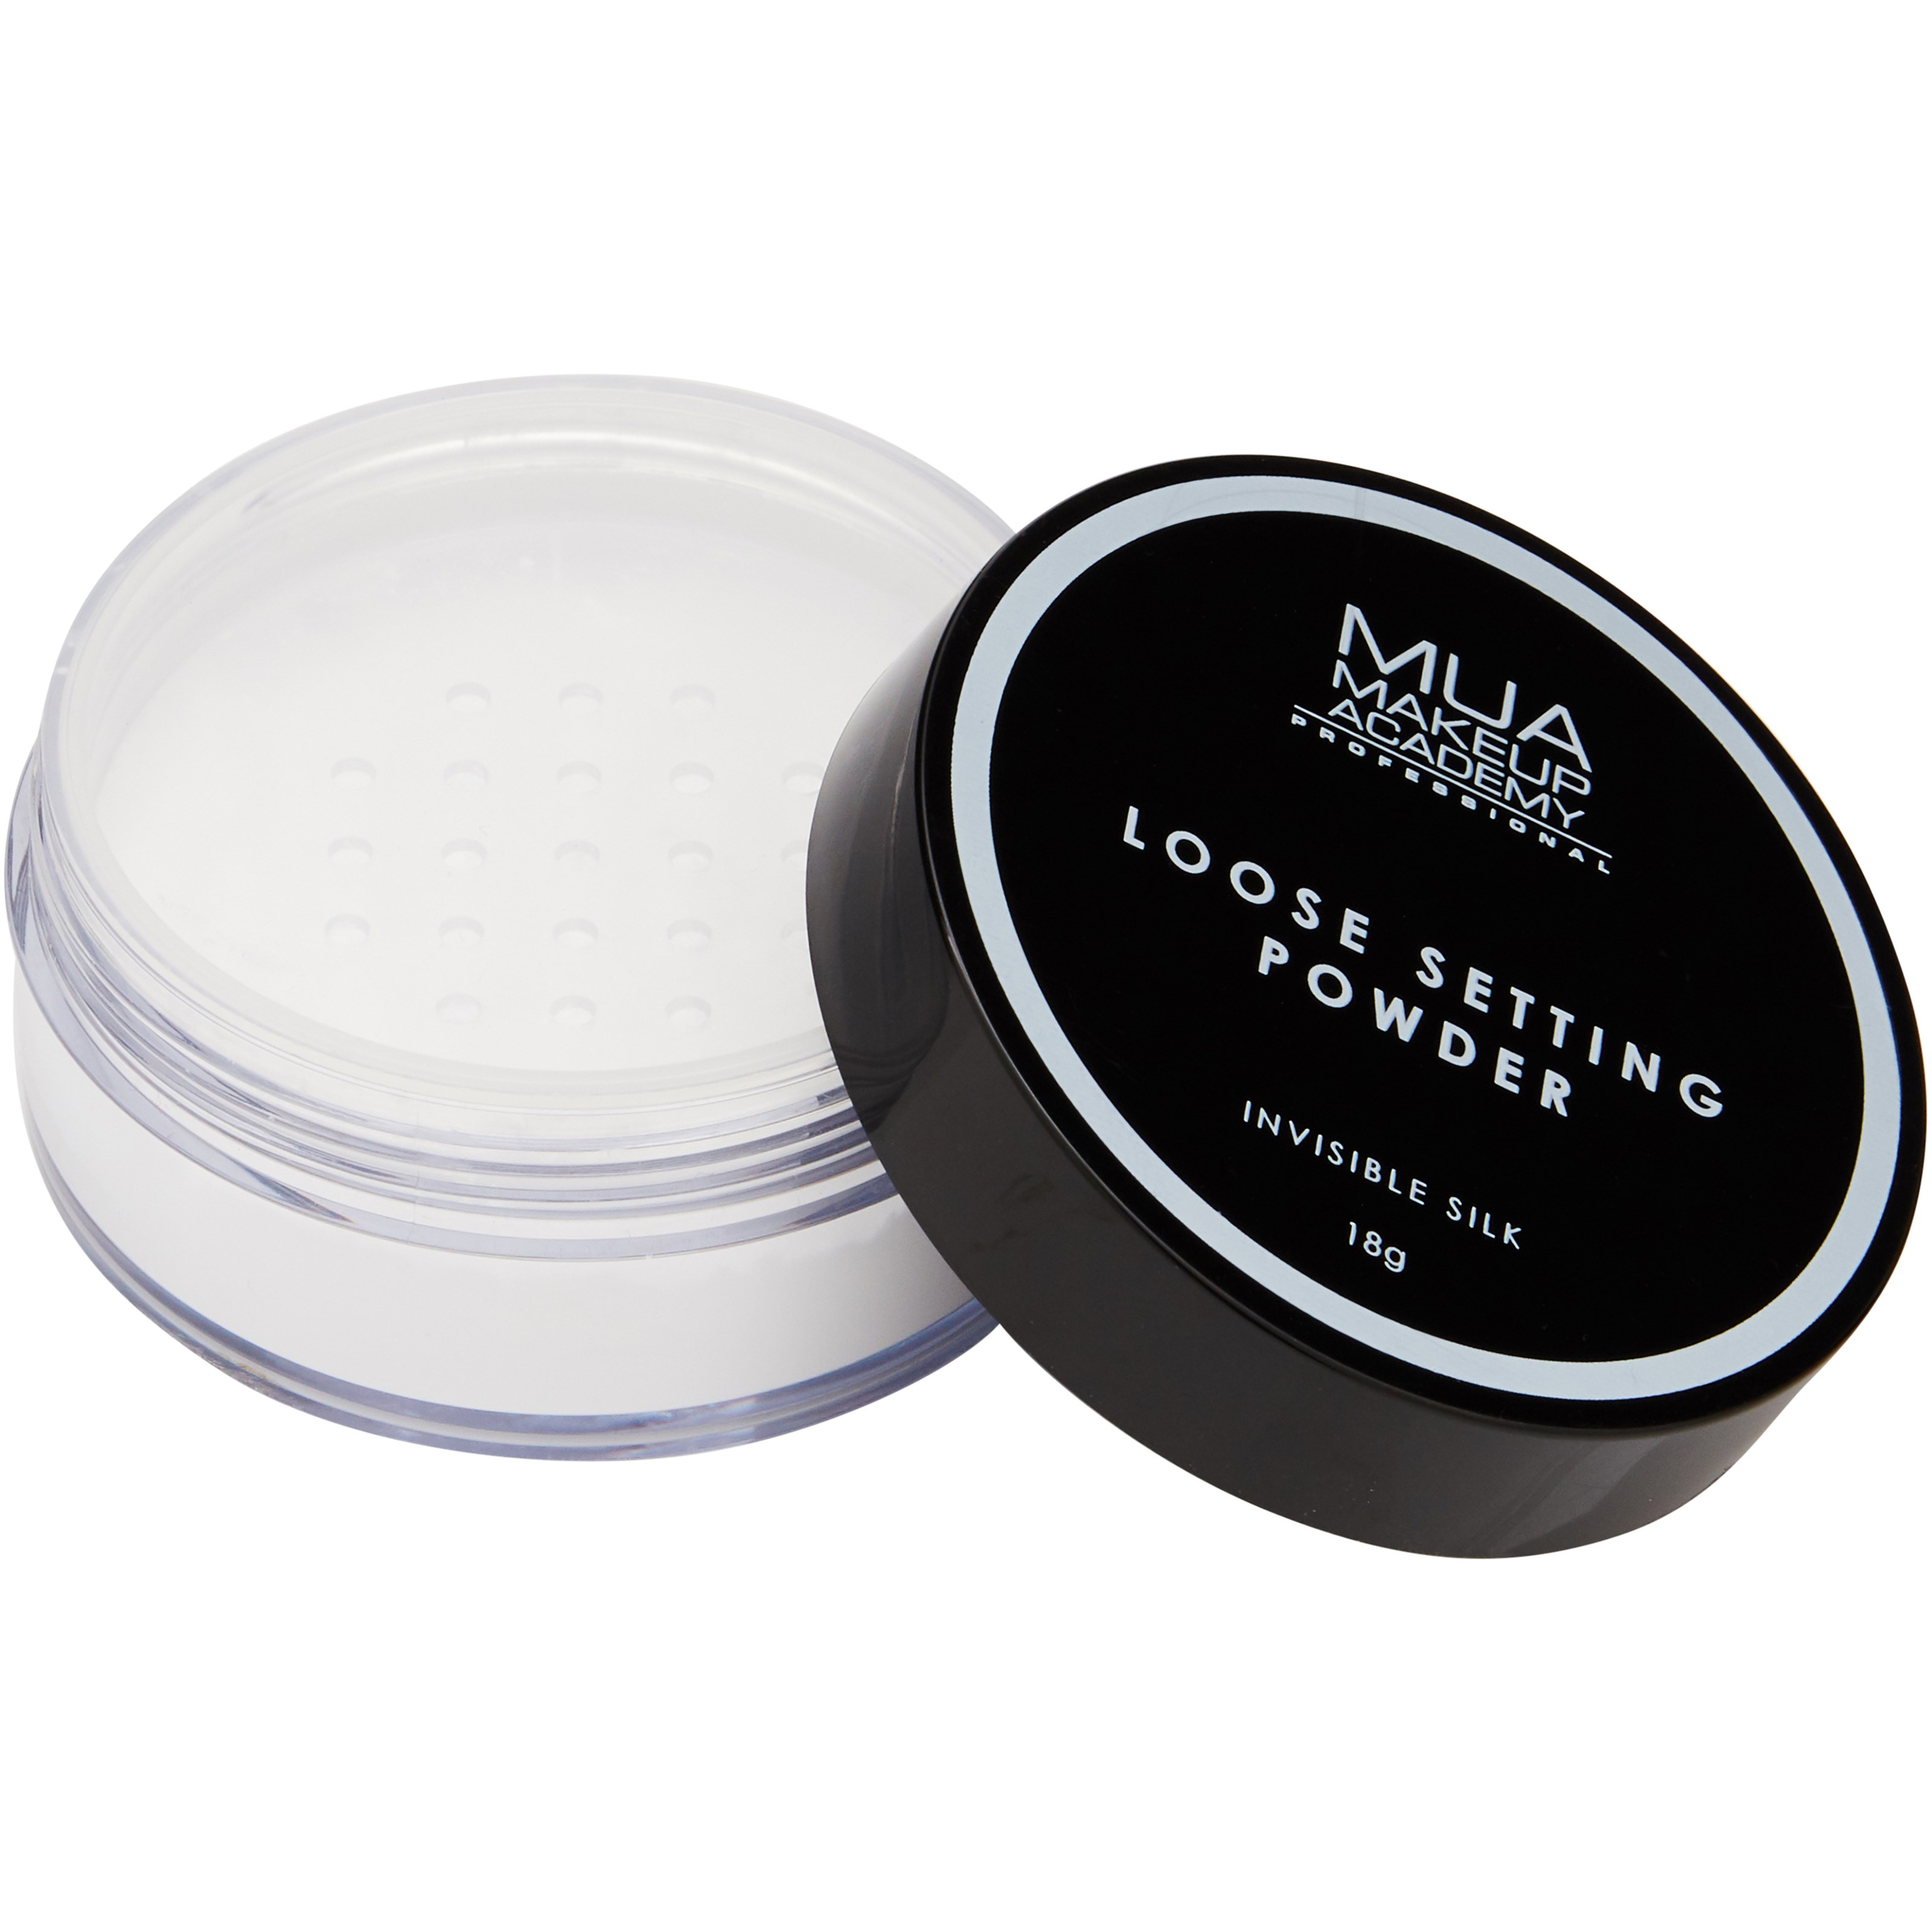 Makeup Academy Professional Loose Powder 18 g Invisible Silk 18 g